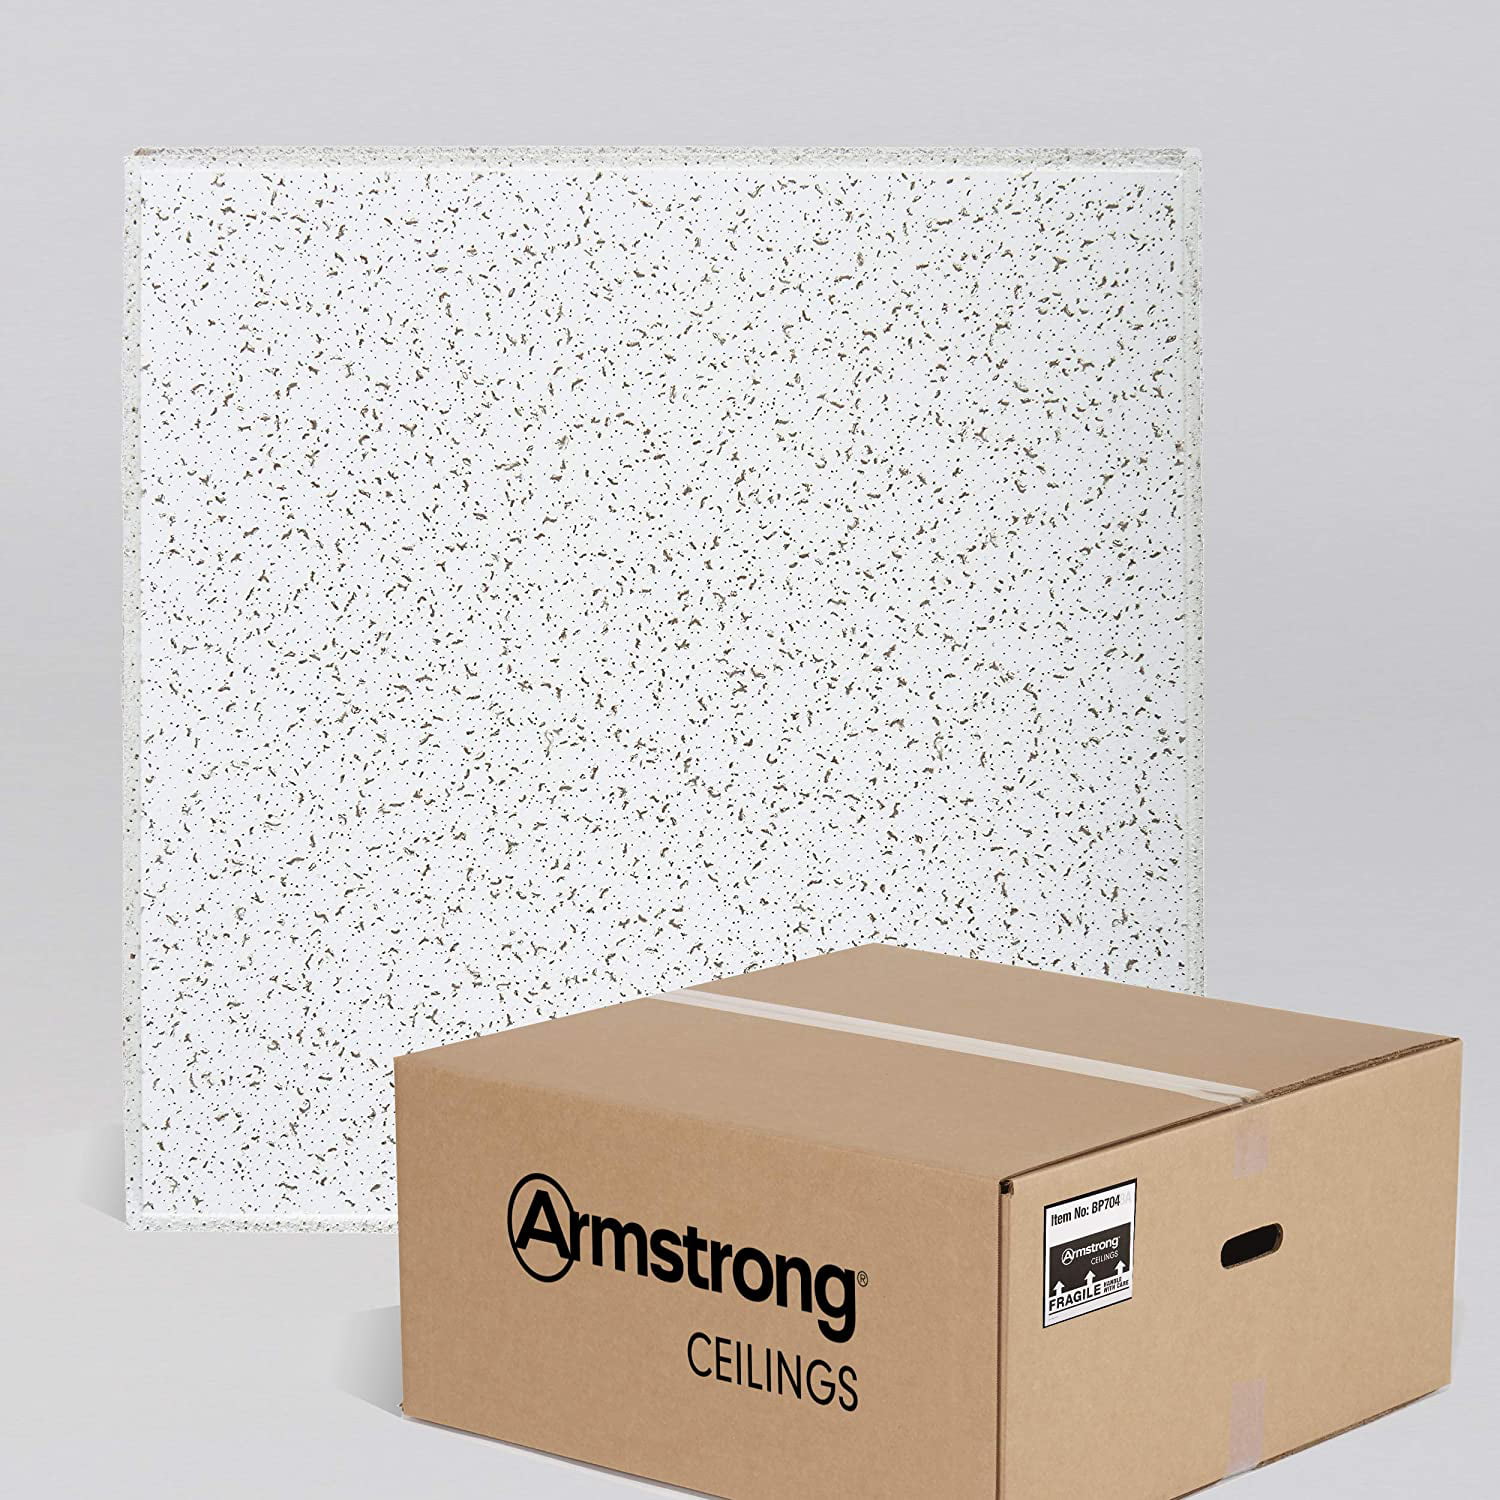 Armstrong Ceiling Tiles; 2x2 Ceiling Tiles - Acoustic ...